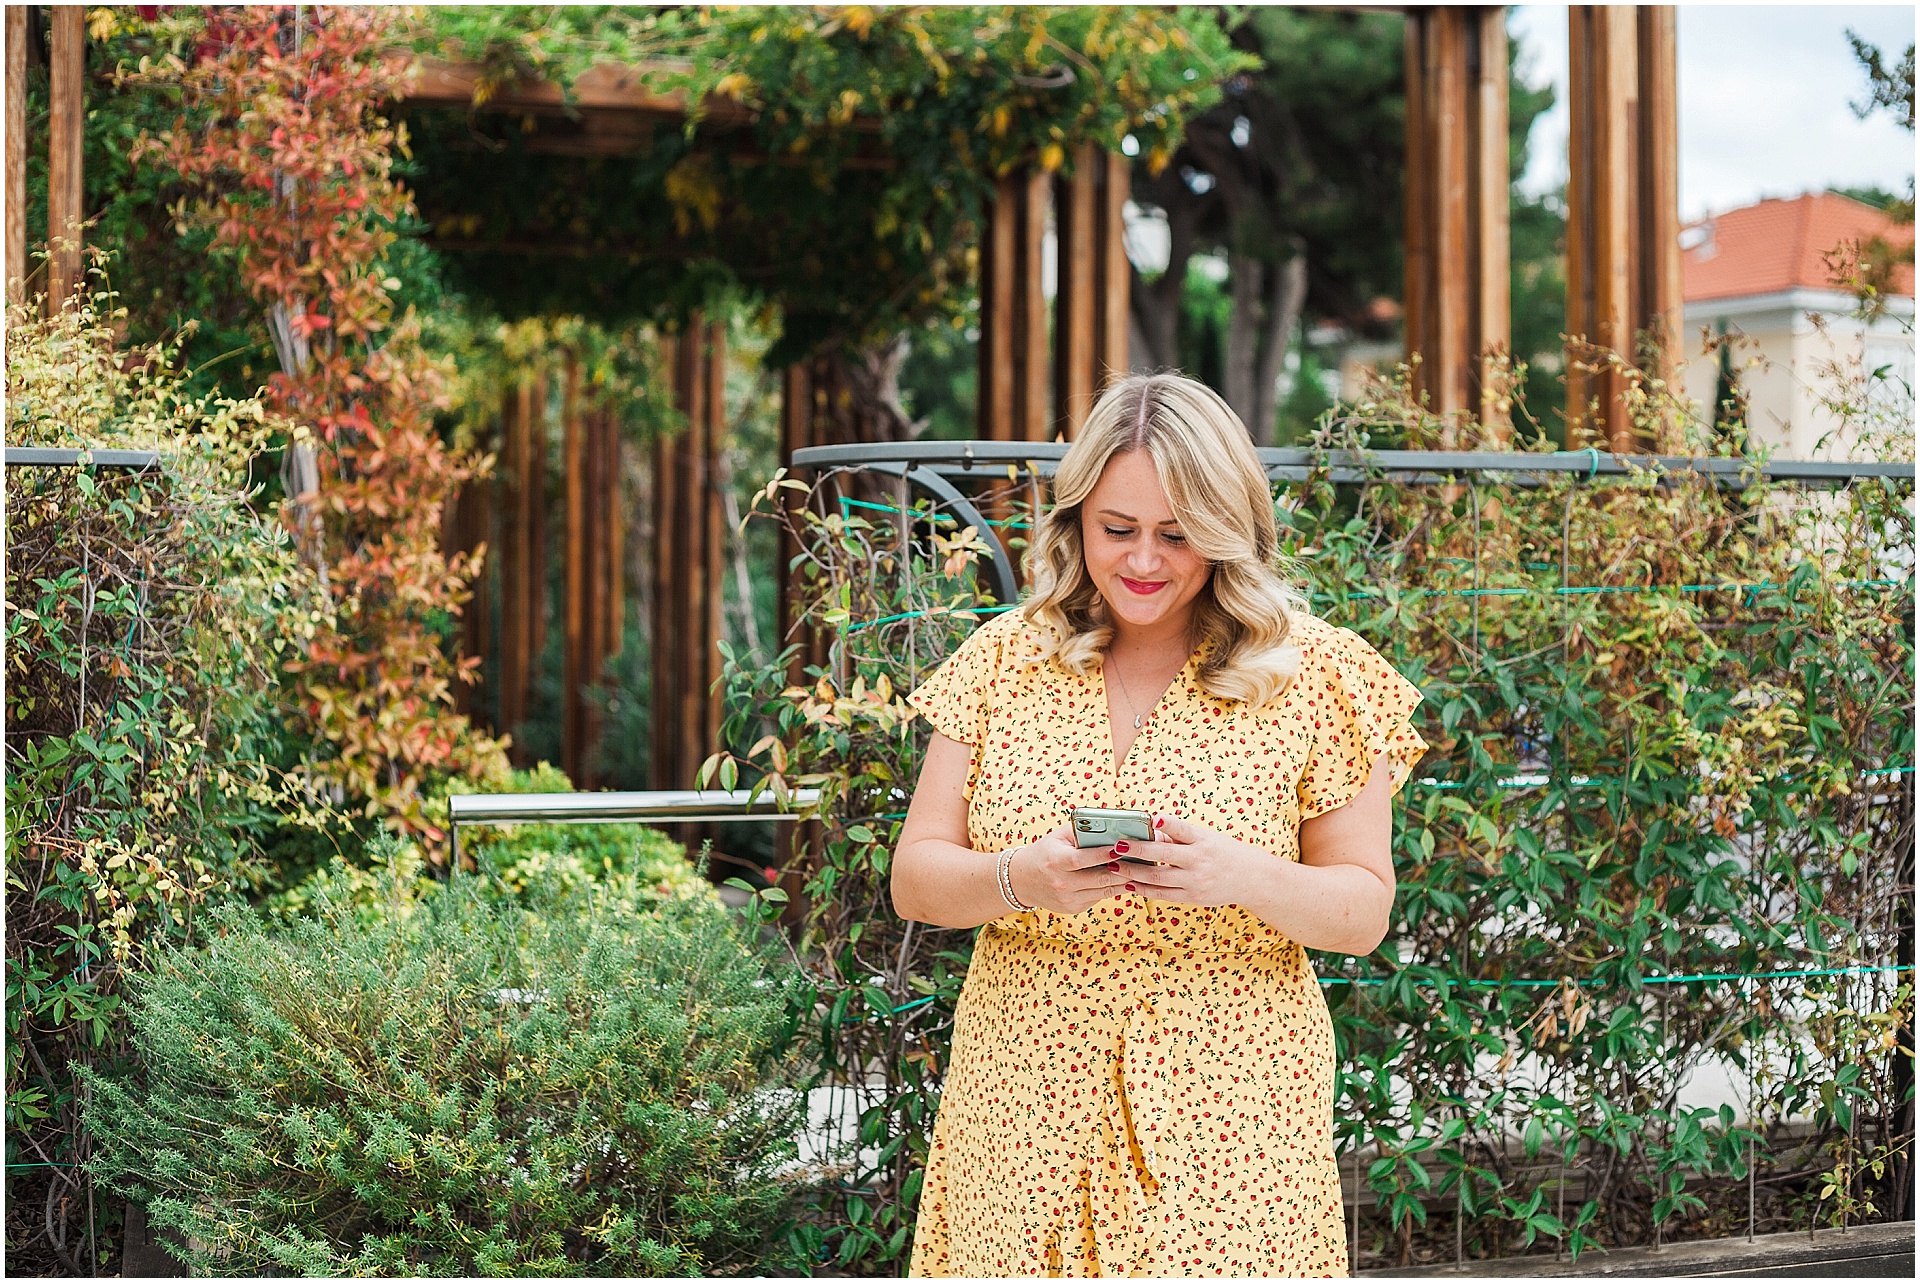 Chantelle on her phone in a garden in Croatia, images by destination brand photographer AKP Branding Stories